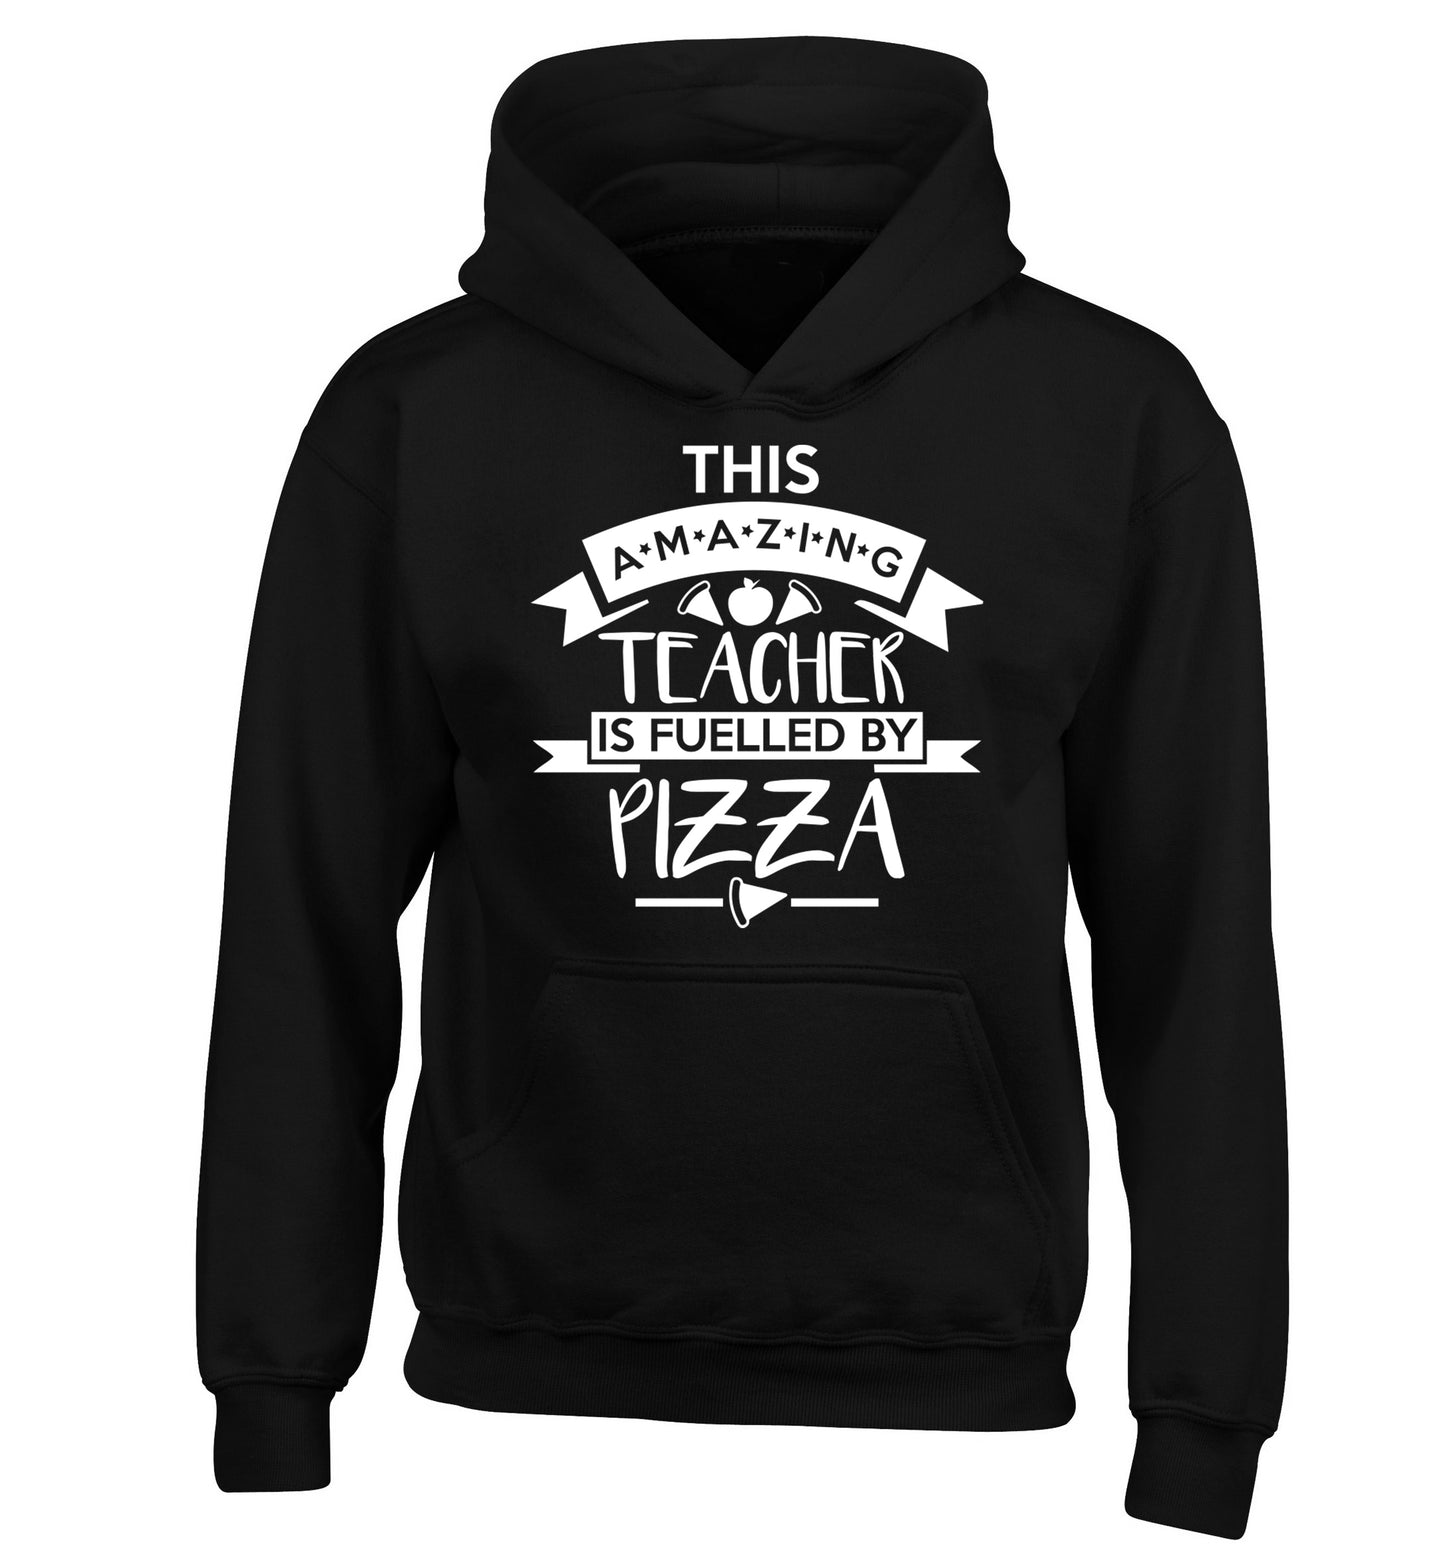 This amazing teacher is fuelled by pizza children's black hoodie 12-13 Years